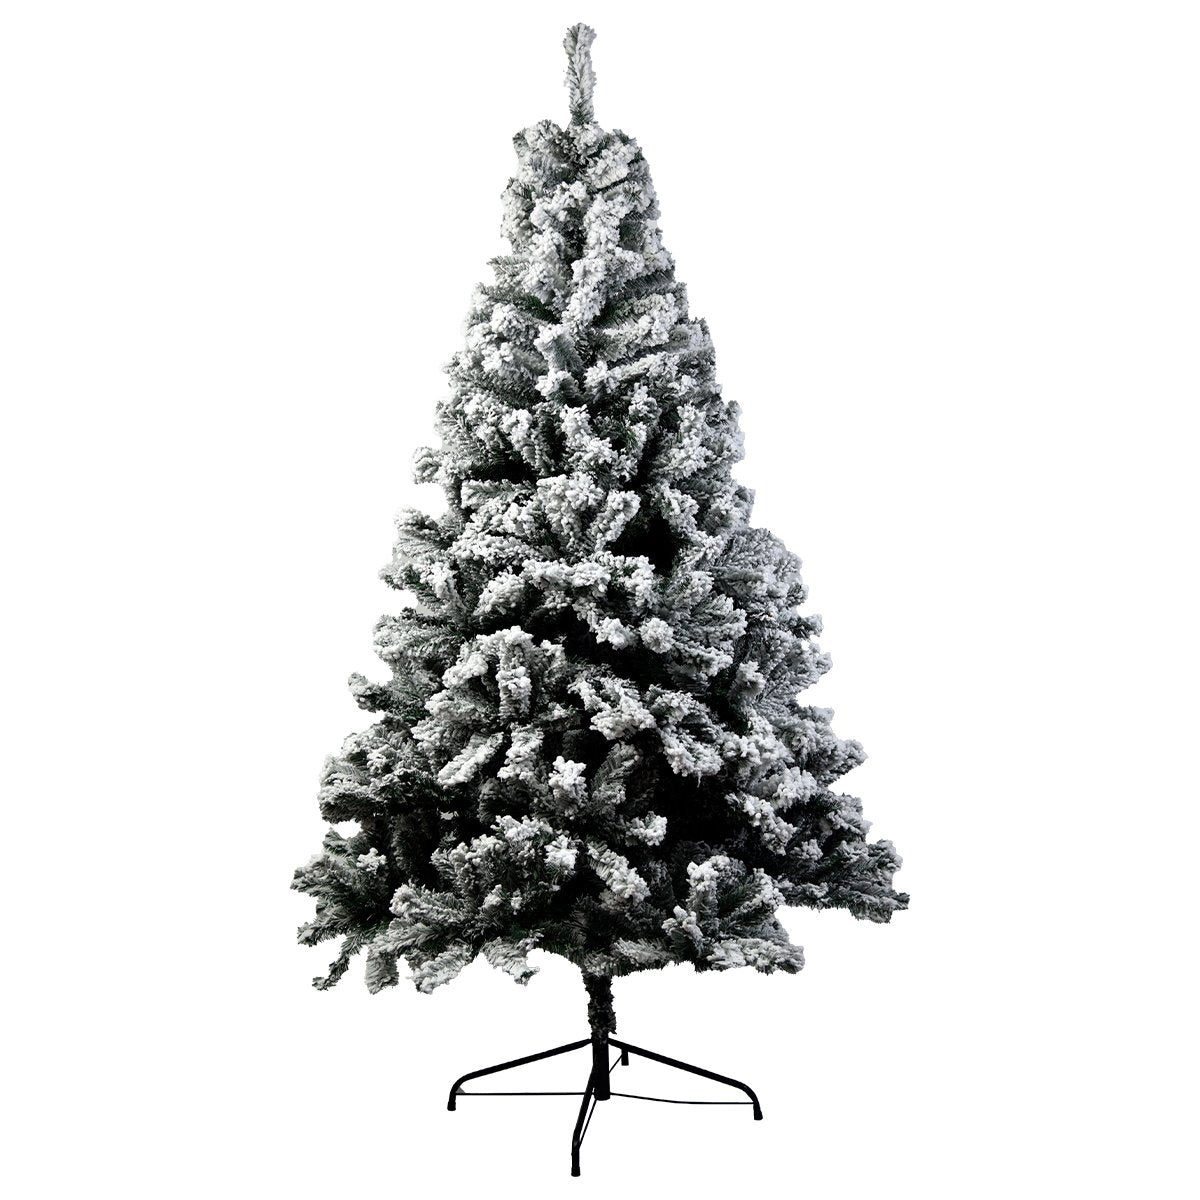 Christabelle Snow-Tipped Artificial Christmas Tree 1.8m - 850 Tips - SILBERSHELL